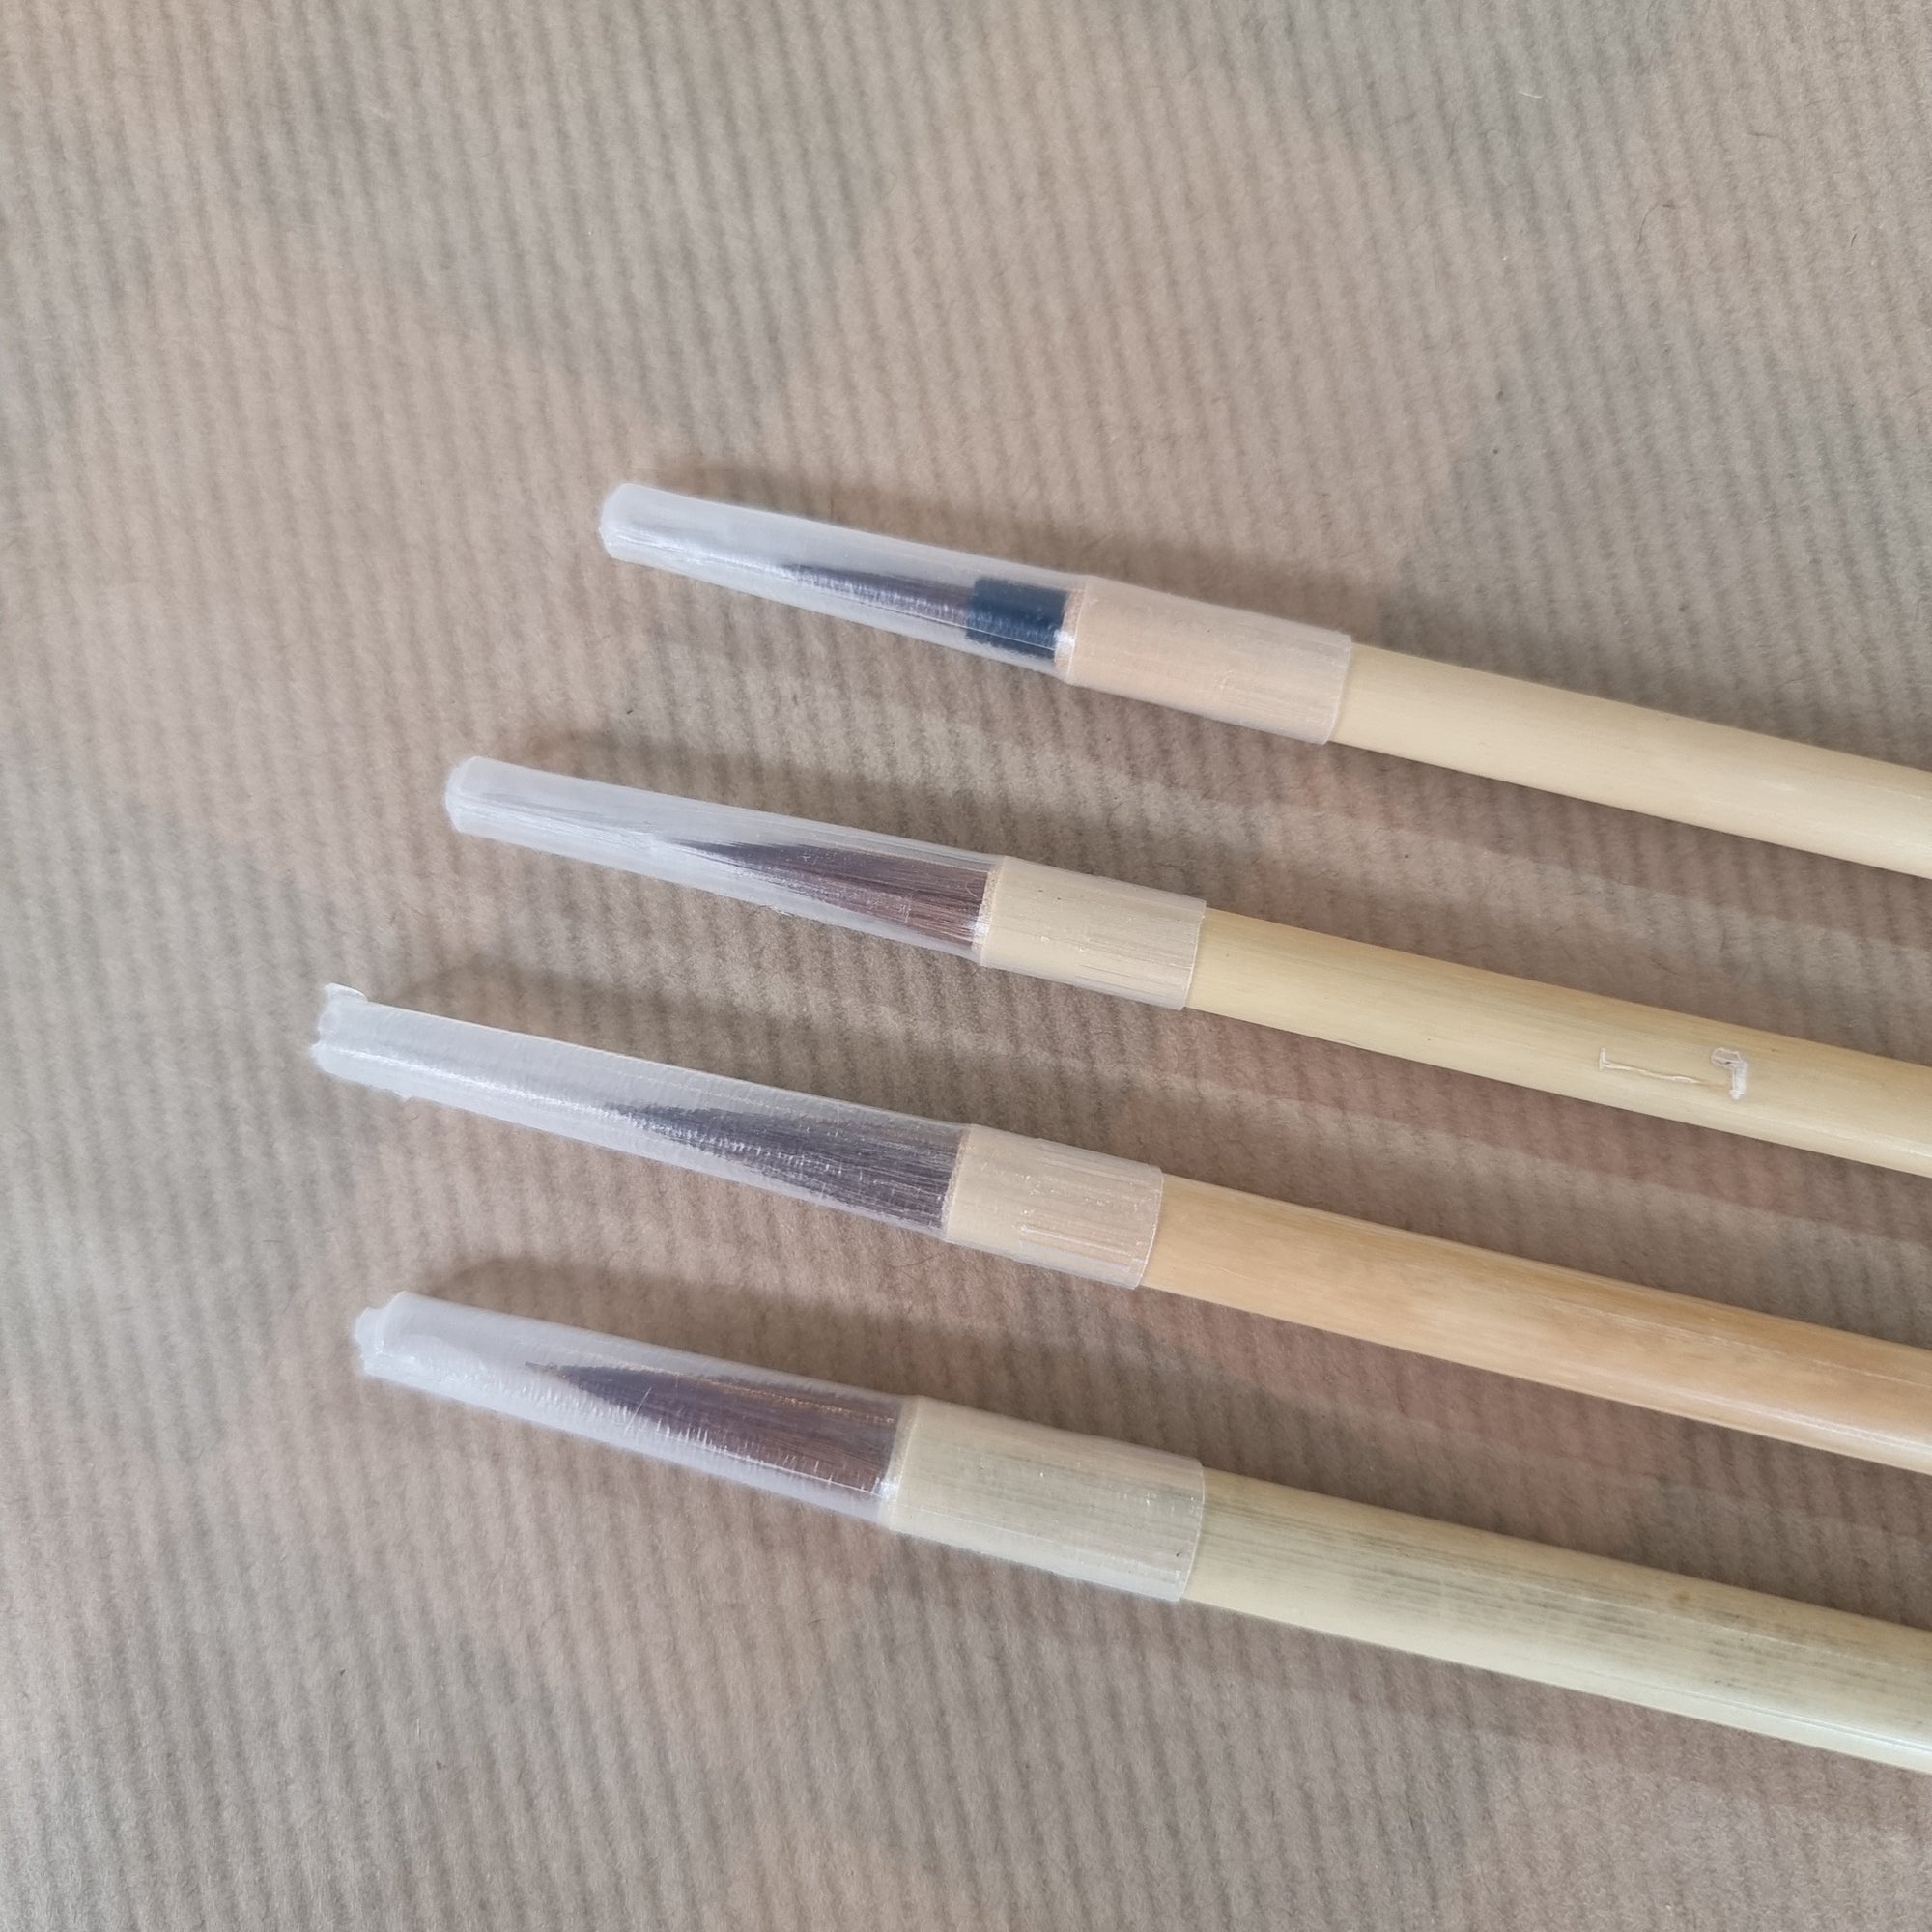 Traditional bamboo paint brushes